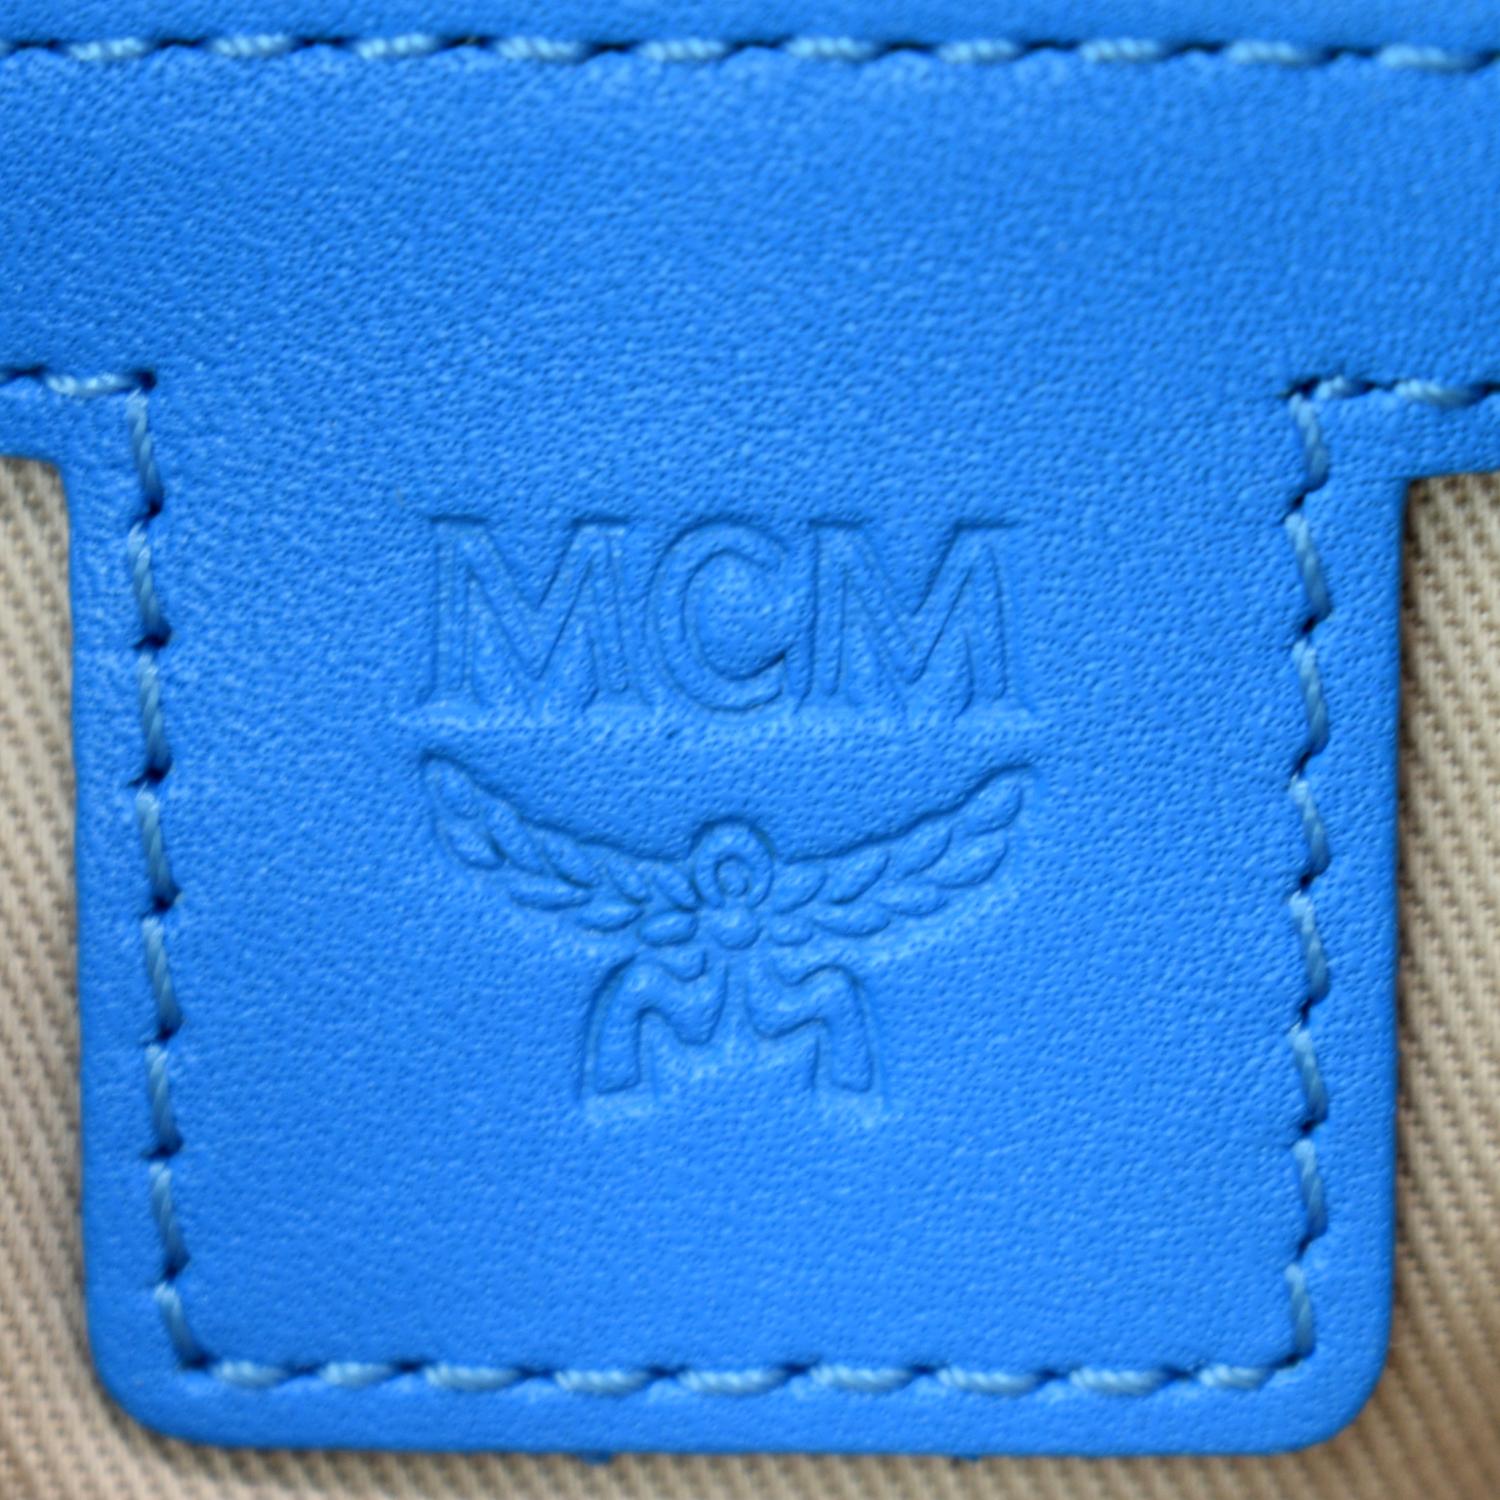 MCM, Bags, Mcm Blue With White Logo Crossbody Camera Bag With Logo Strap  New With Dust Bag